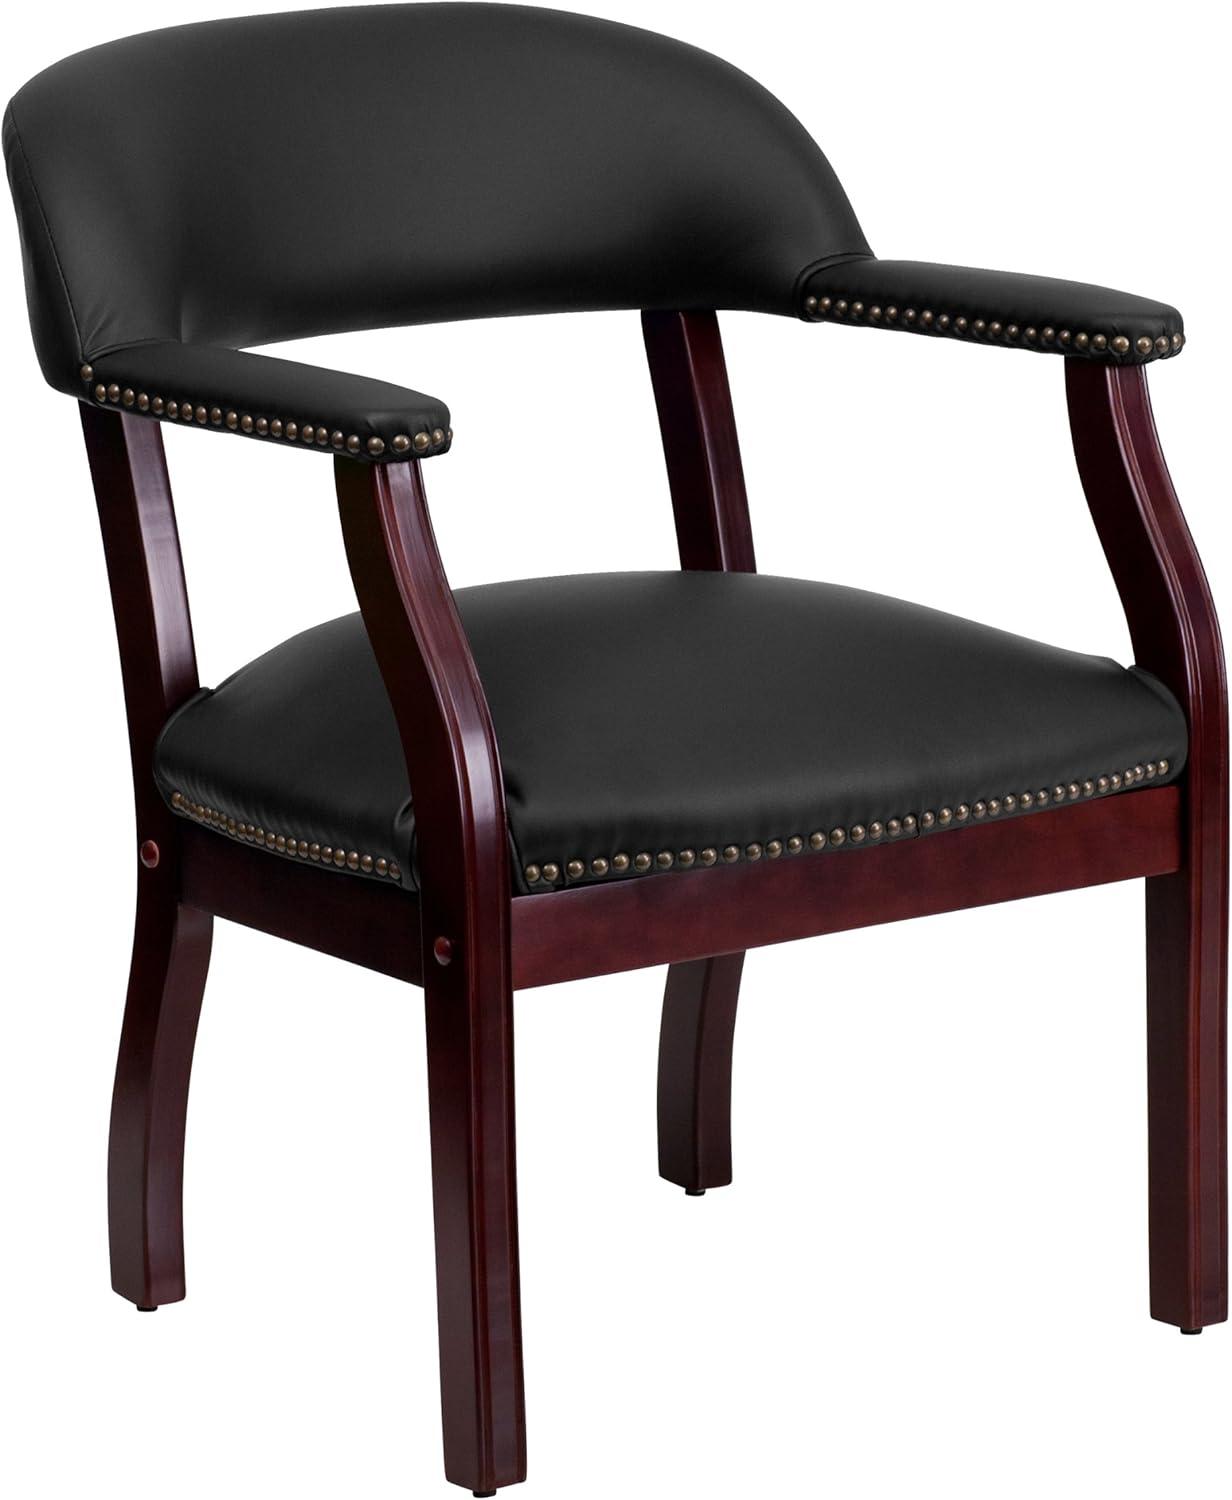 Elegant Black LeatherSoft Conference Chair with Brass Nail Accents